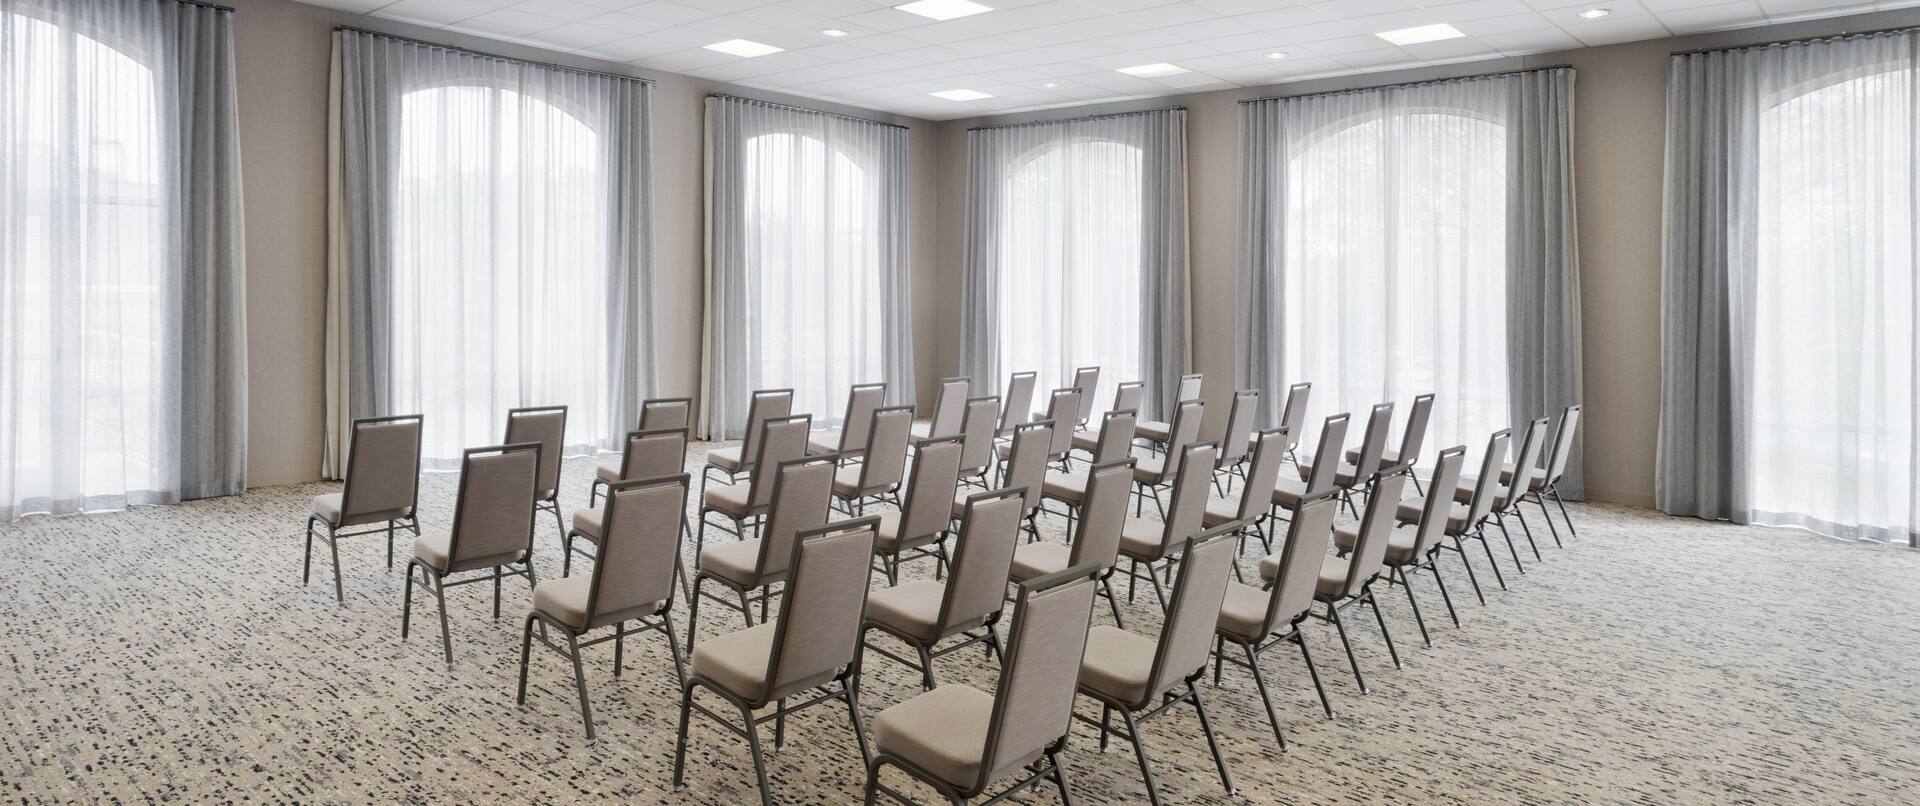 Host your next event in our large meeting room